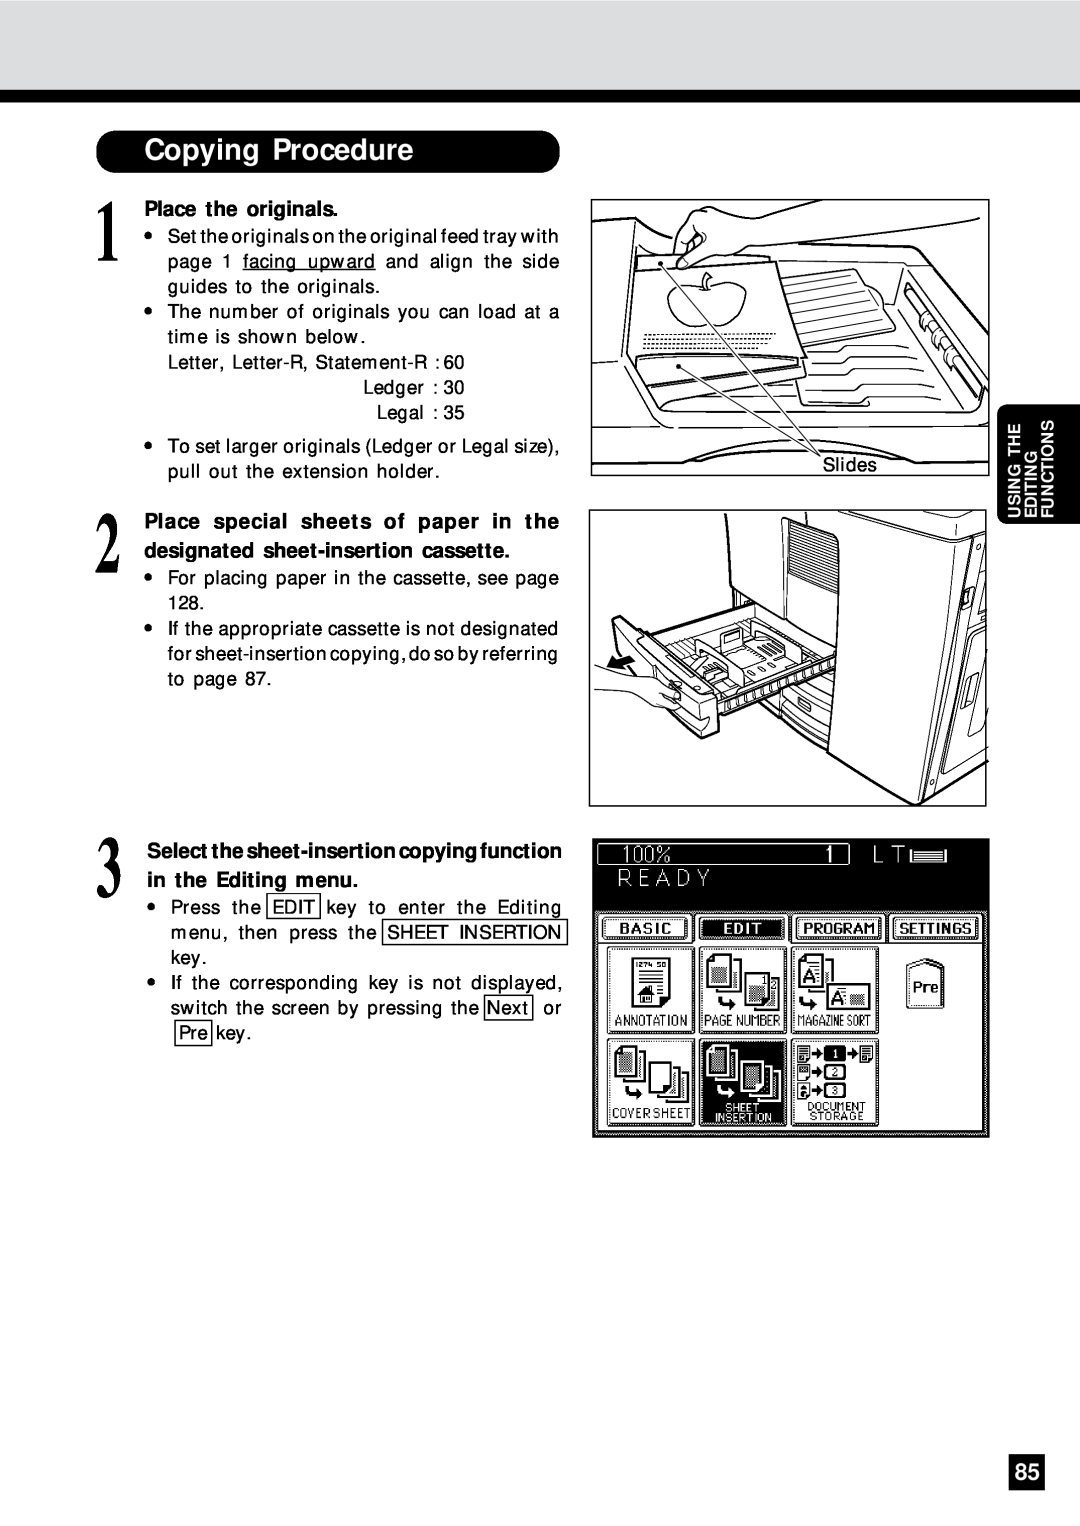 Sharp AR-650 Place special sheets of paper in the, designated sheet-insertion cassette, in the Editing menu, Slides 